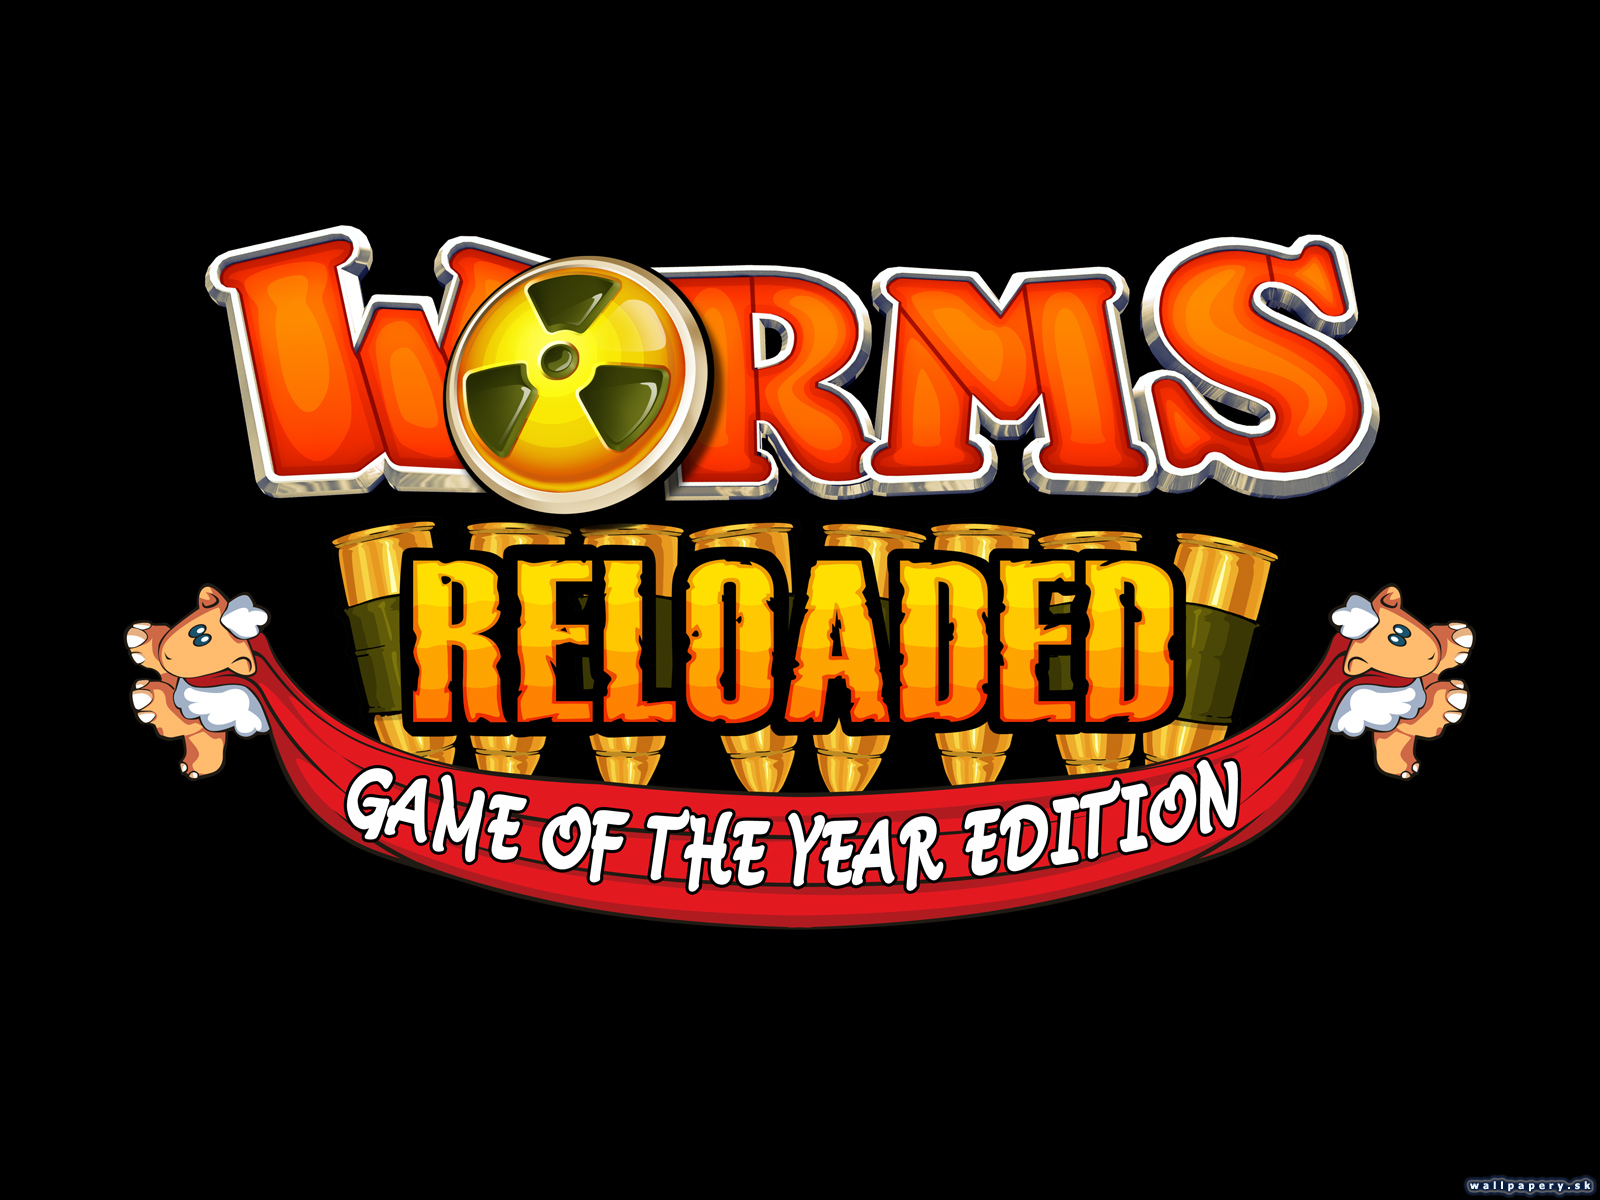 Worms Reloaded: Game of the Year Edition - wallpaper 3